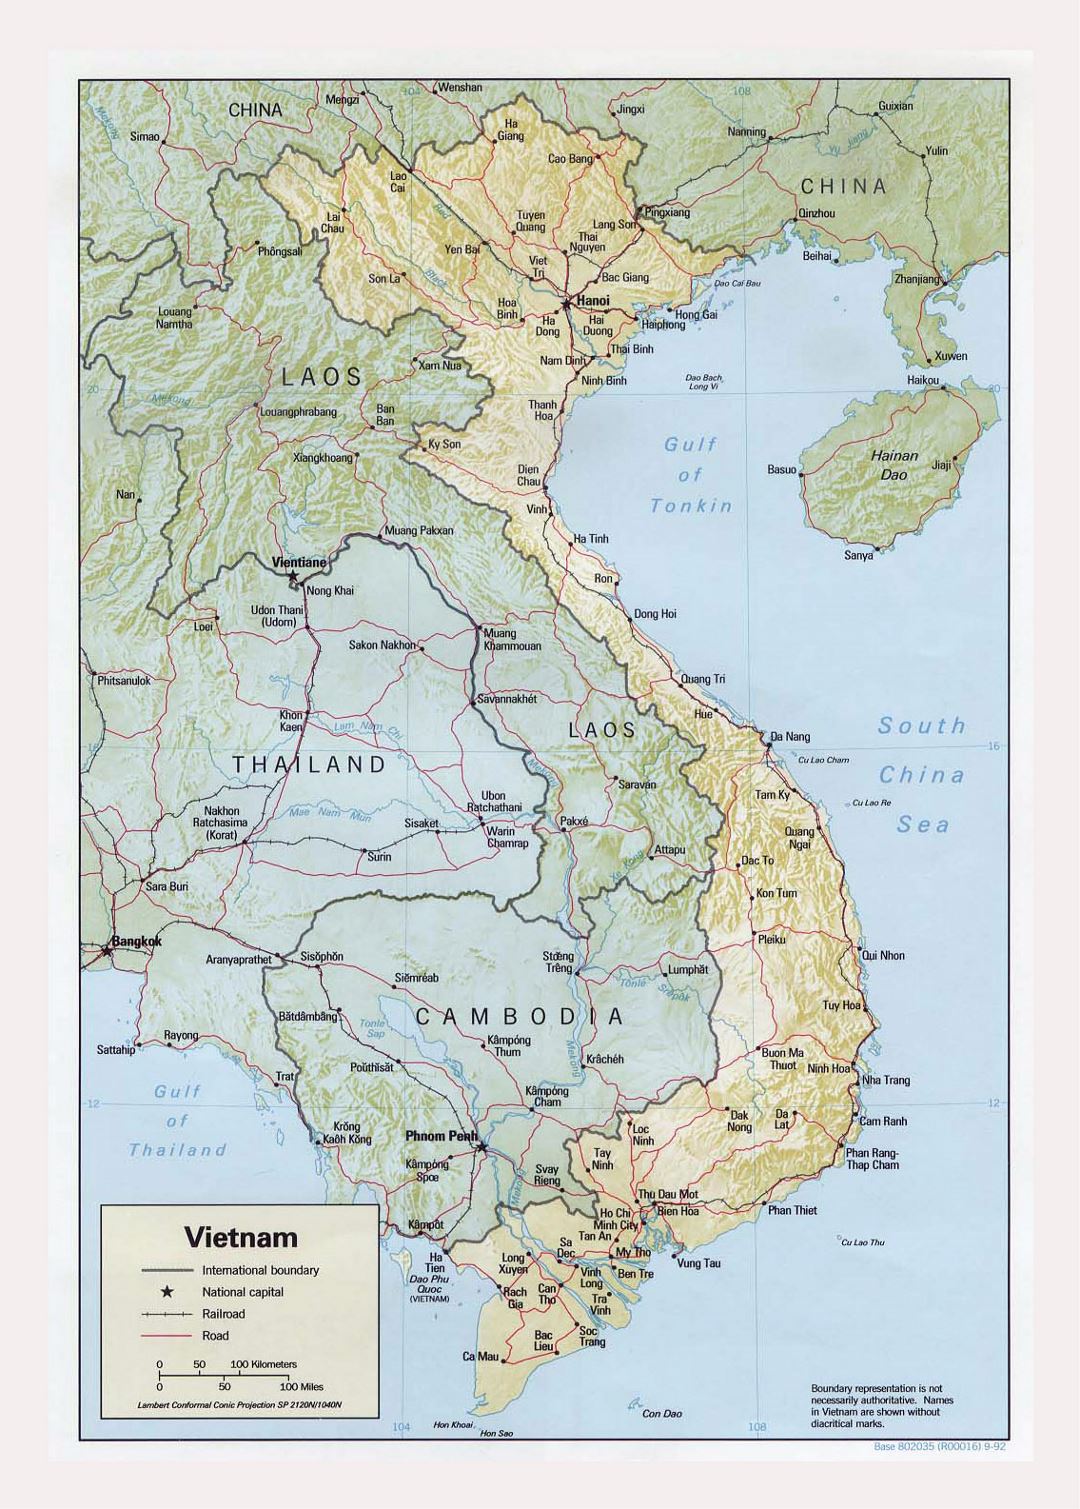 Detailed political map of Vietnam with relief, roads, railroads and major cities - 1992